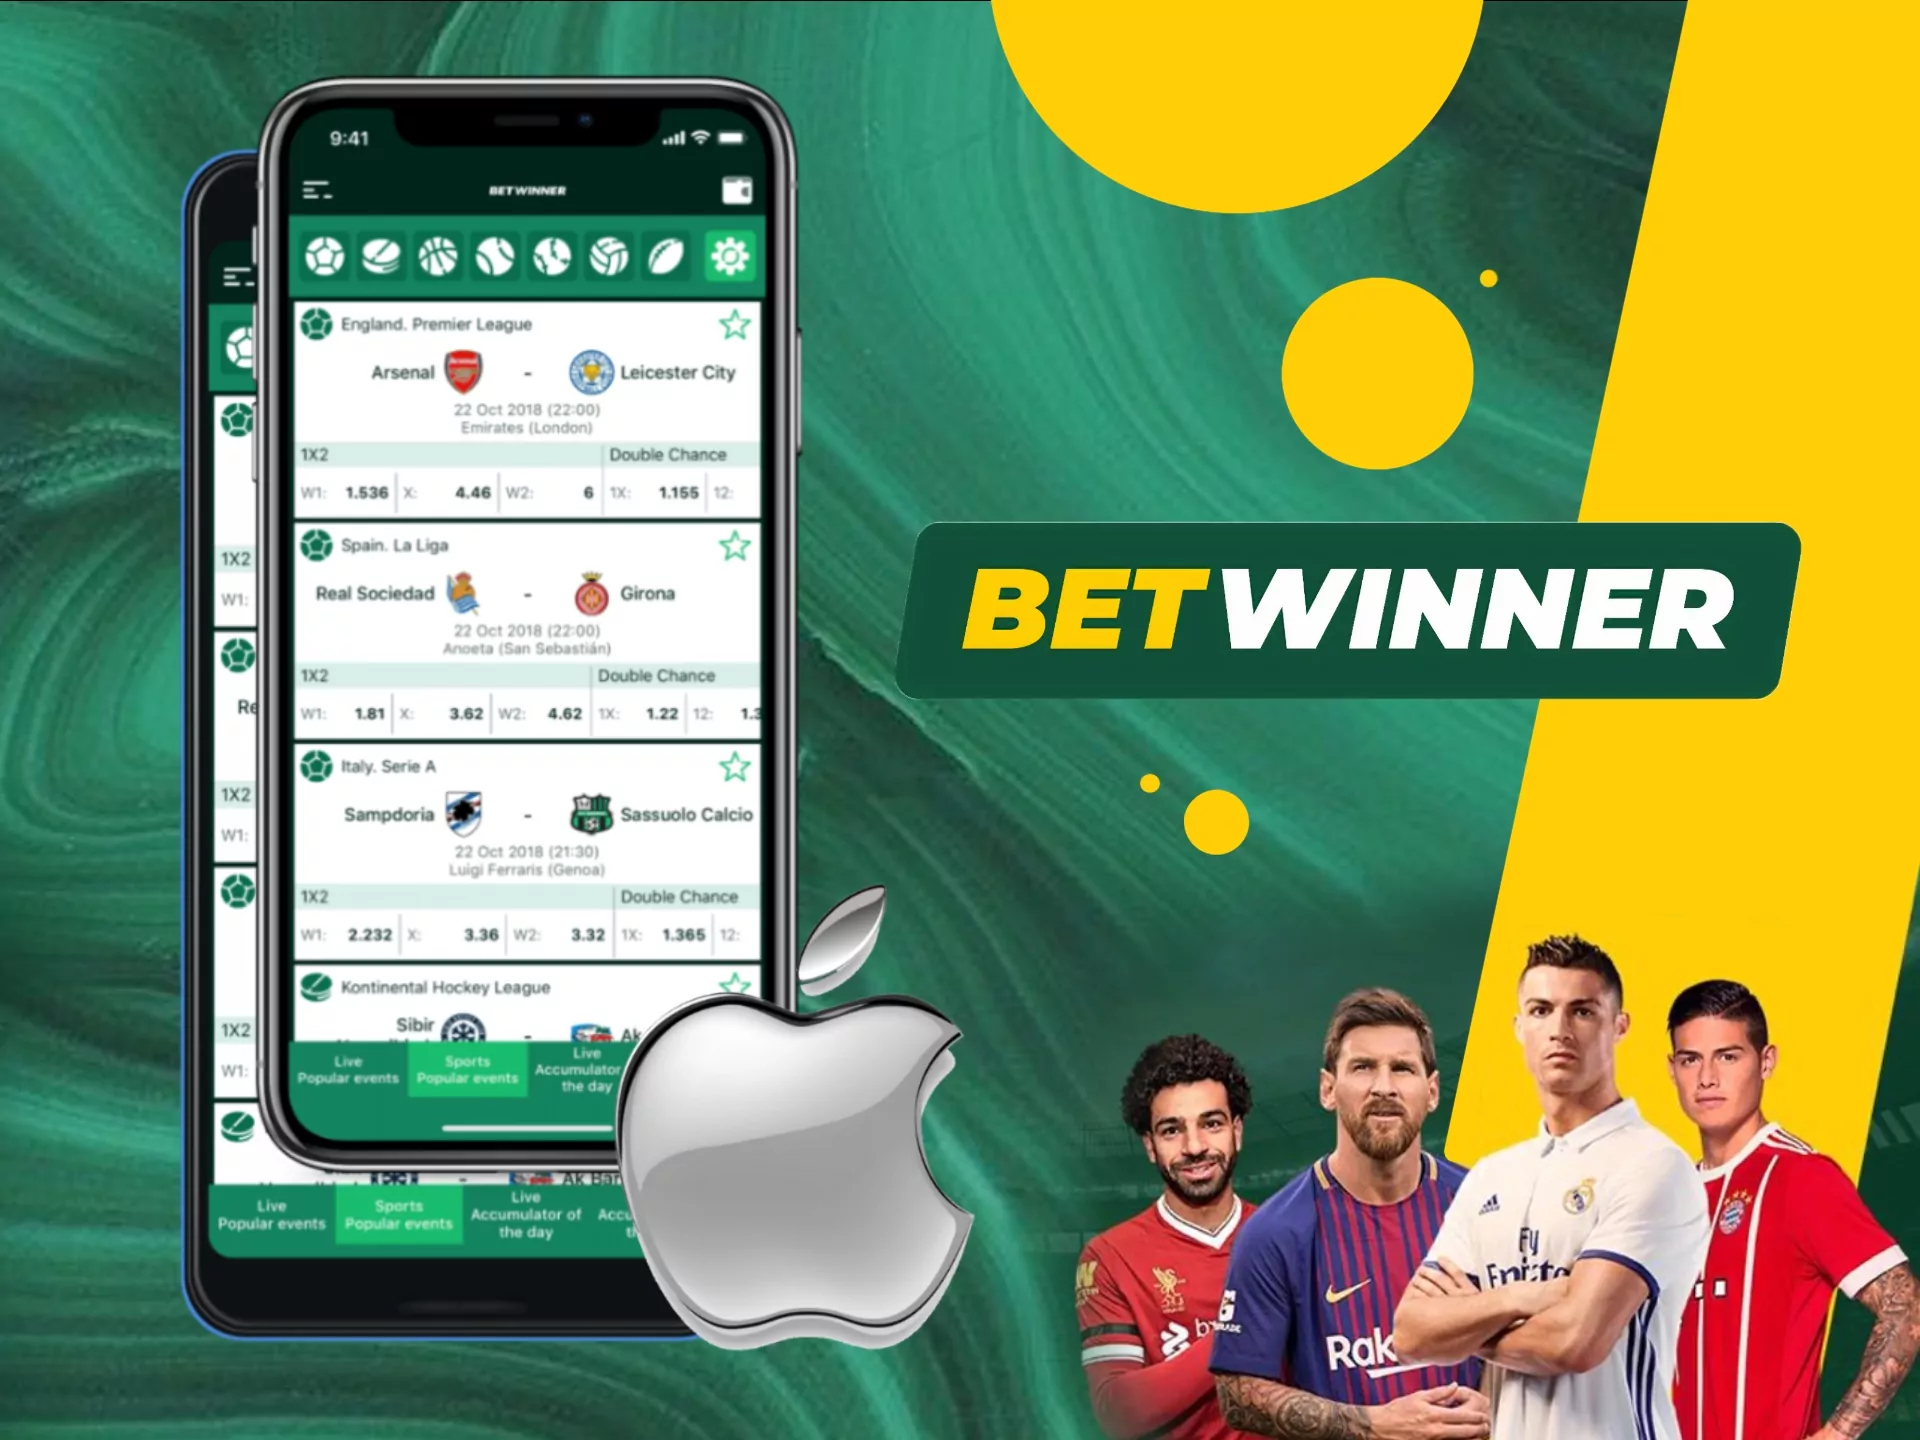 Betwinner Download: Is Not That Difficult As You Think